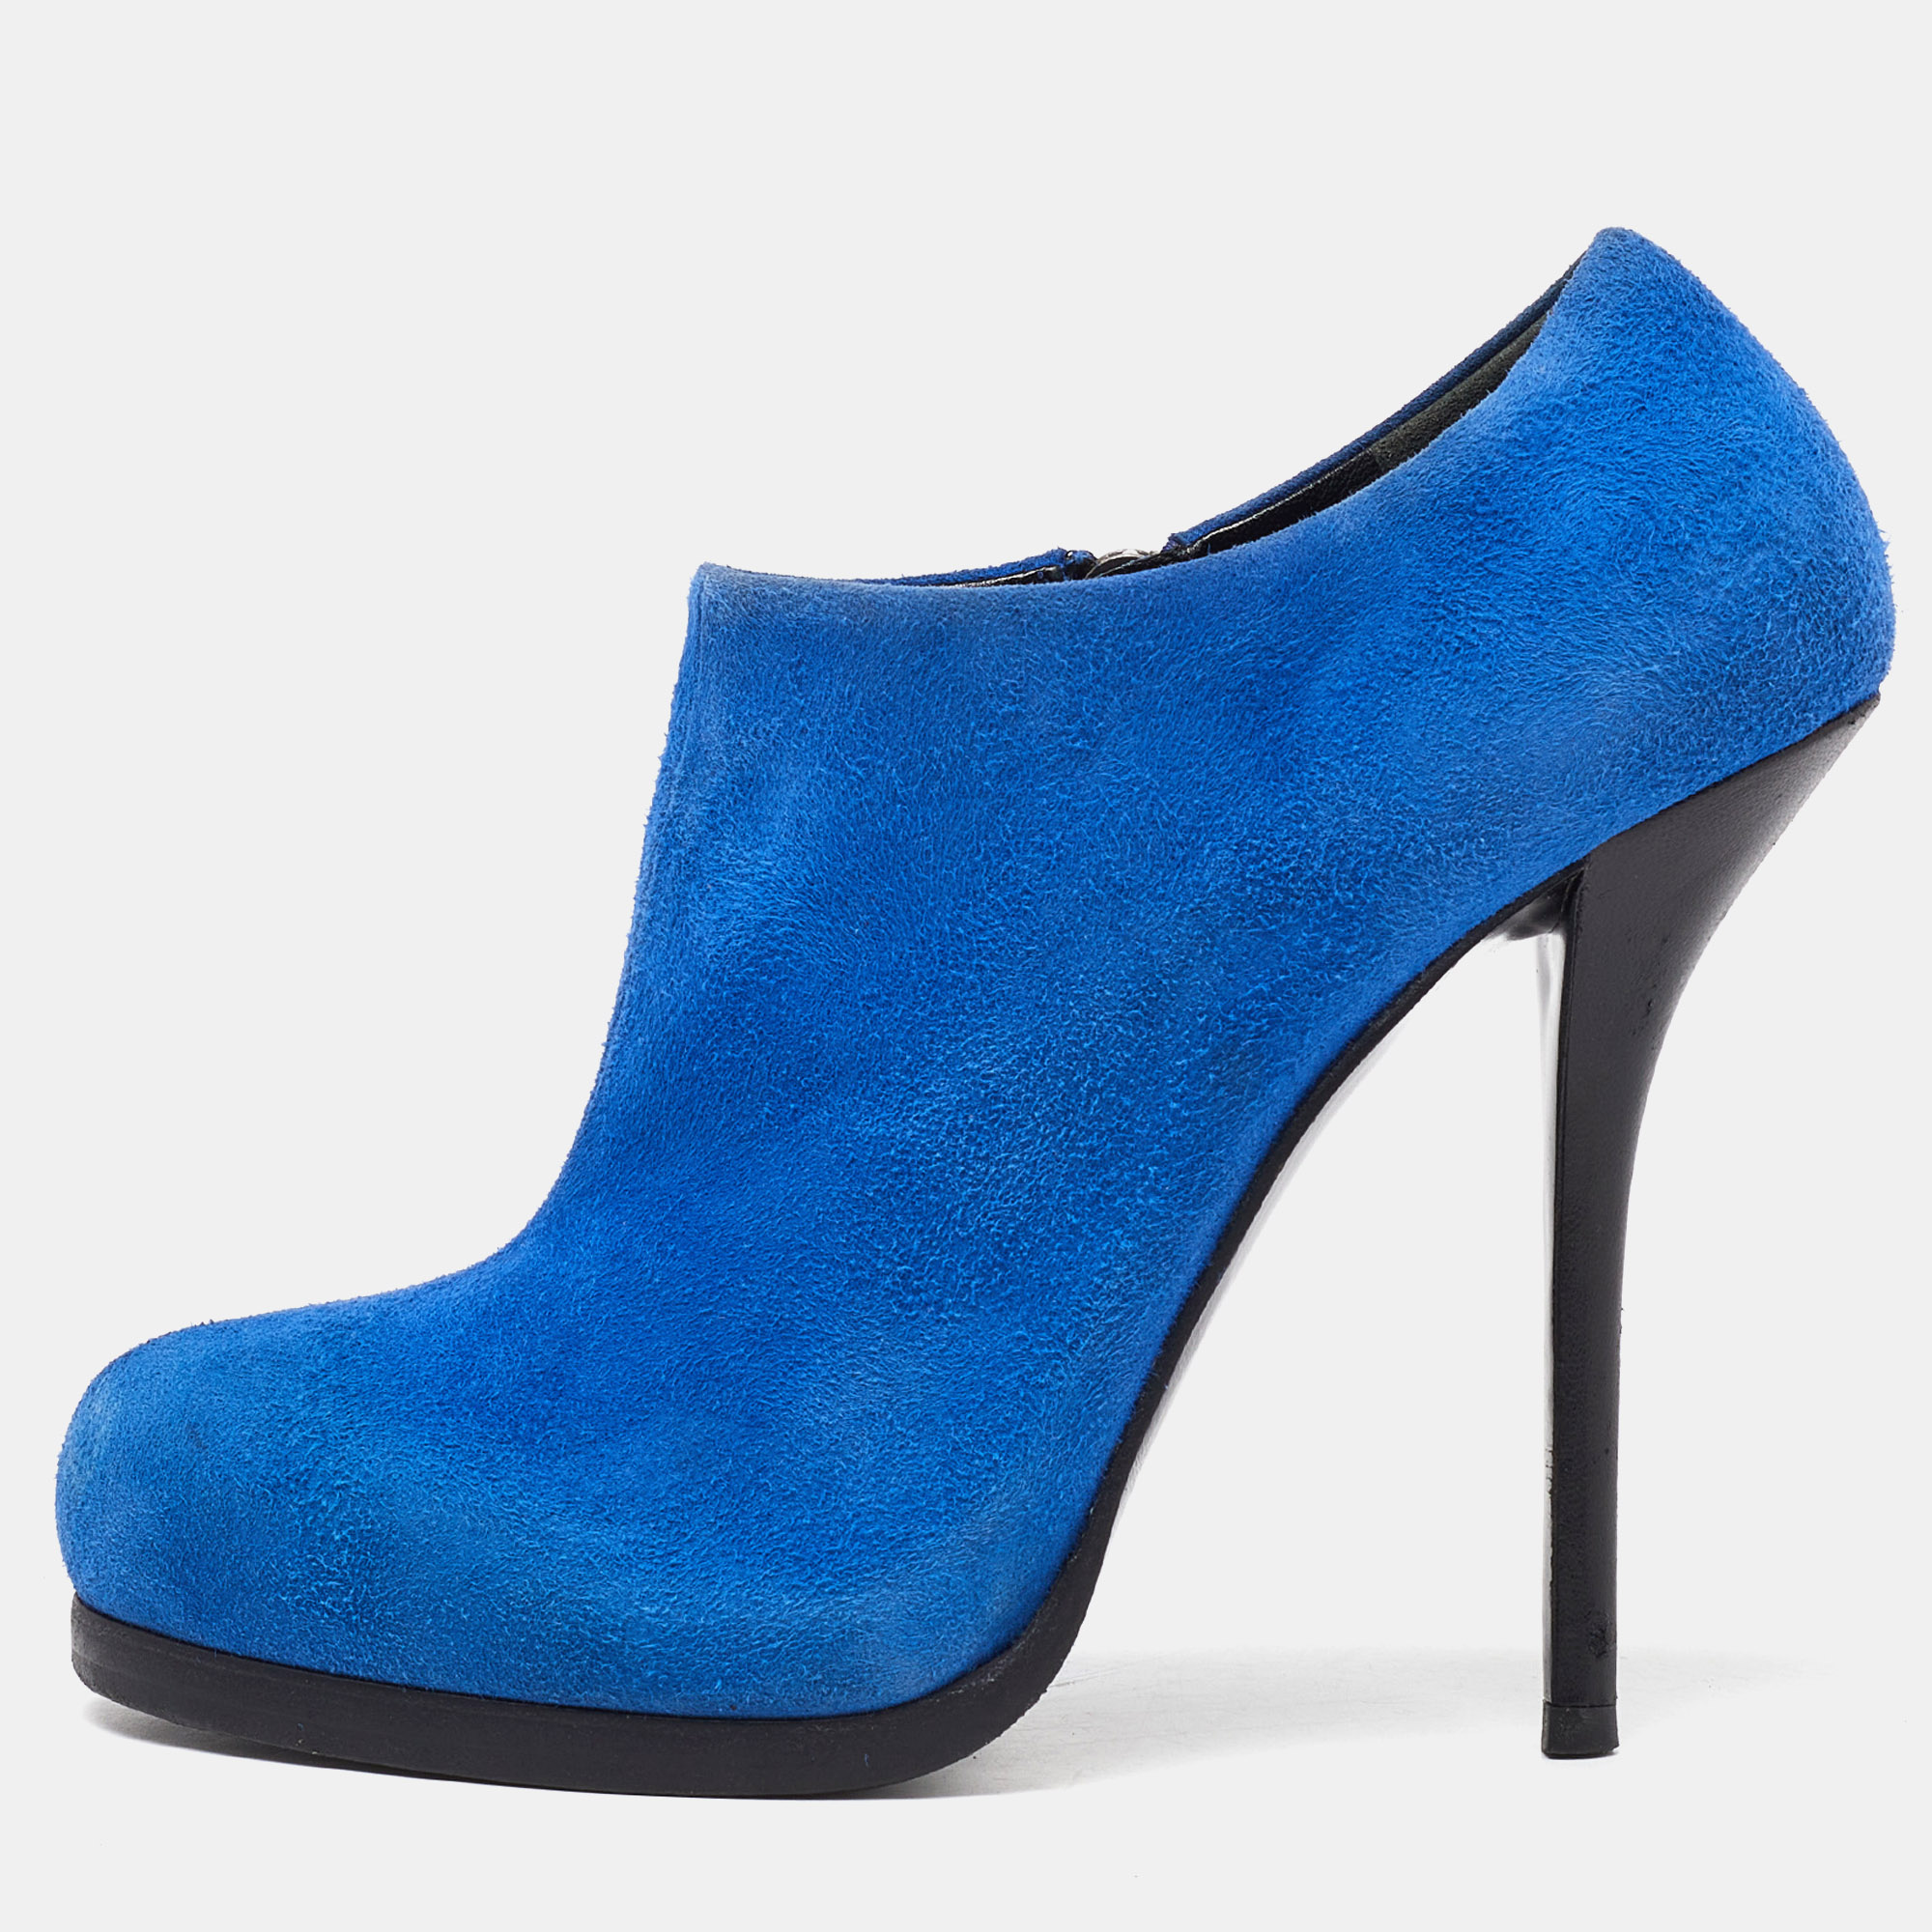 Balenciaga blue suede ankle booties size 39